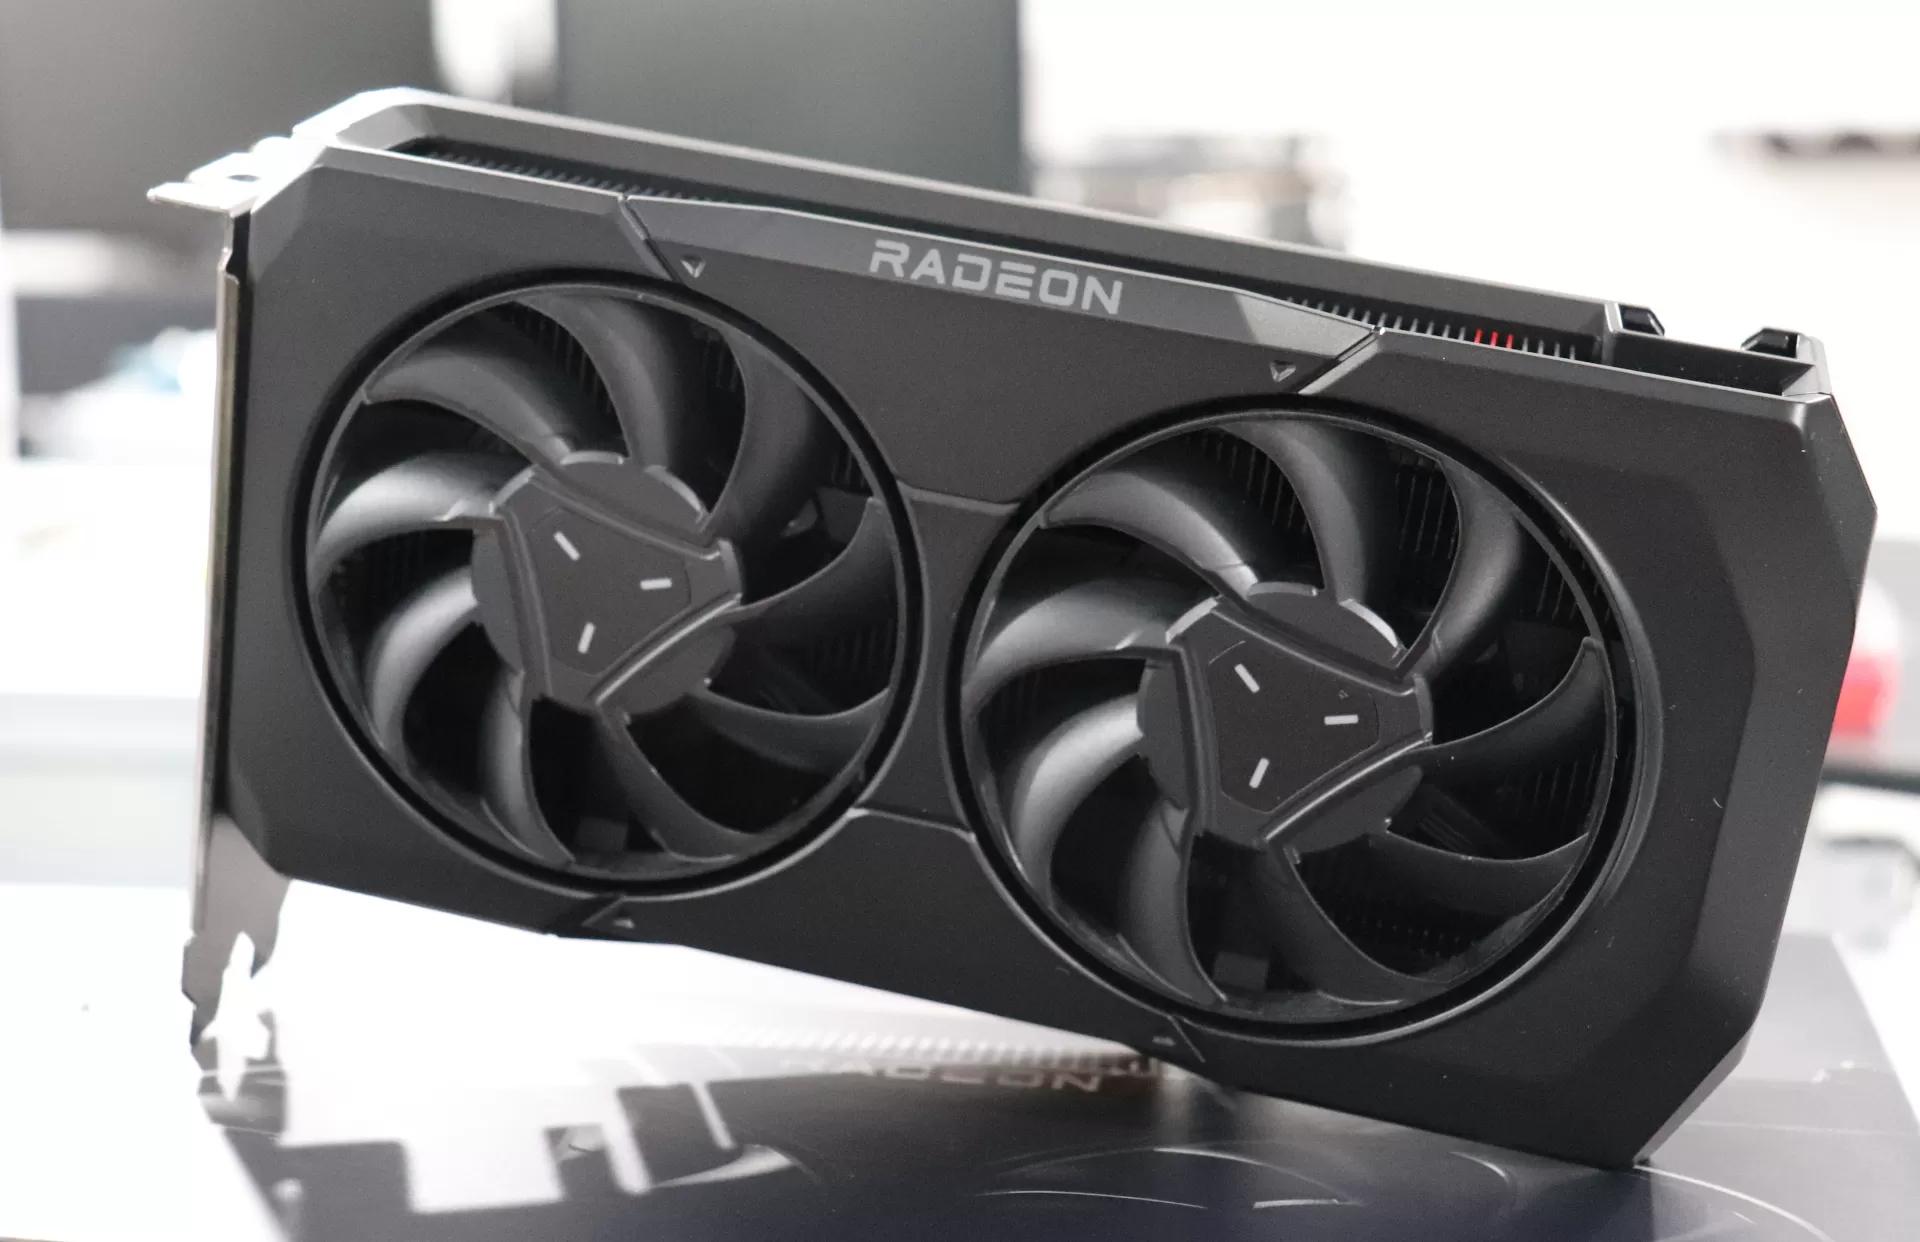 For those that have been interested in the Radeon RX 7900 series for the great open-source driver support on Linux but have been wanting a cheaper gra